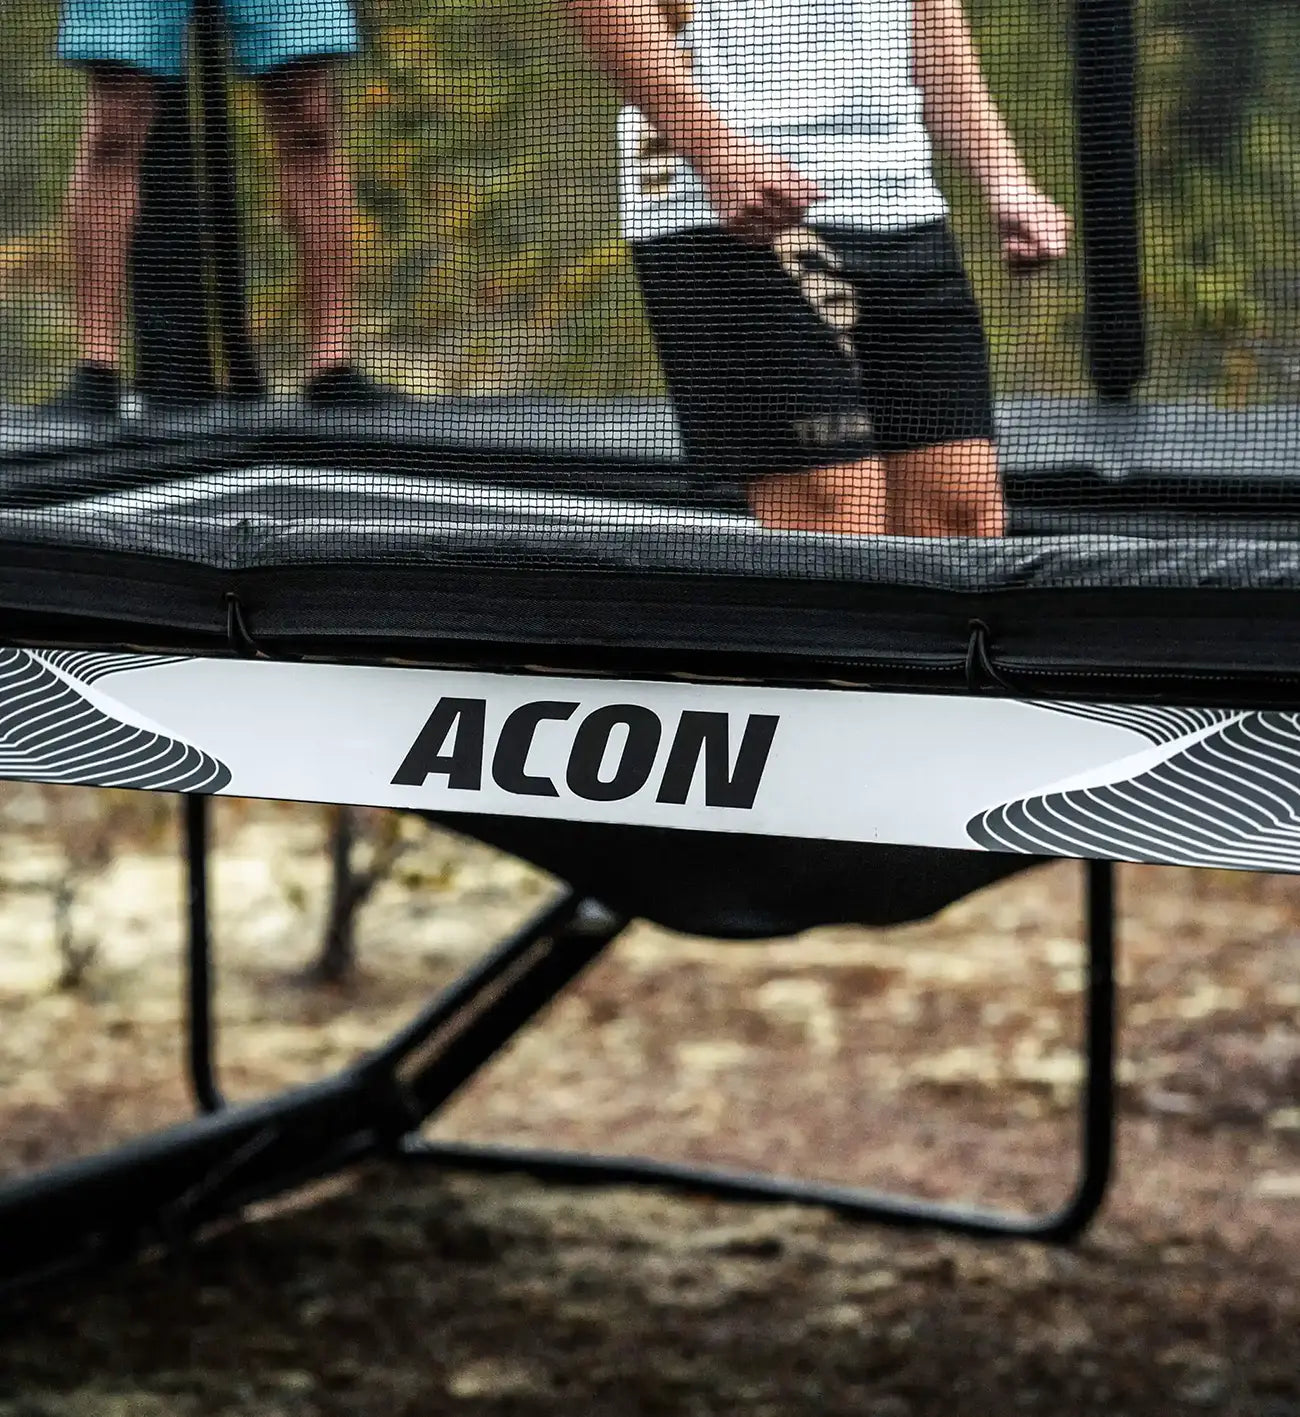 A jumper's feet on Acon X Trampoline during the descent phase. 